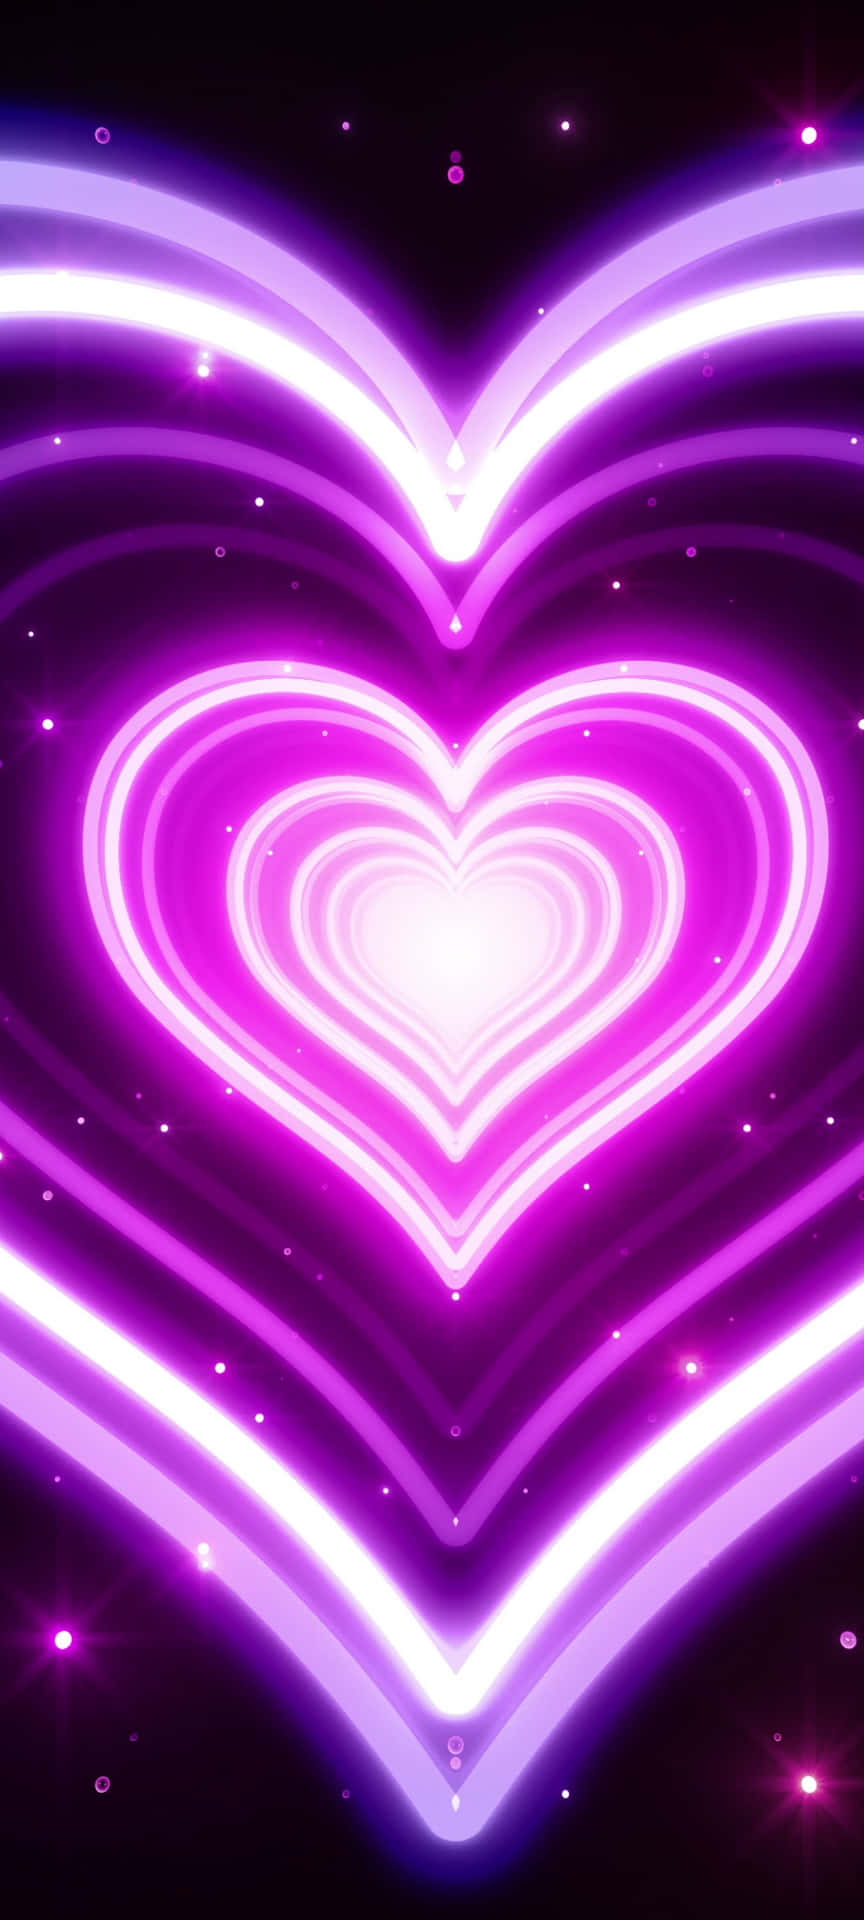 Neon Purple background offers a vibrant feel